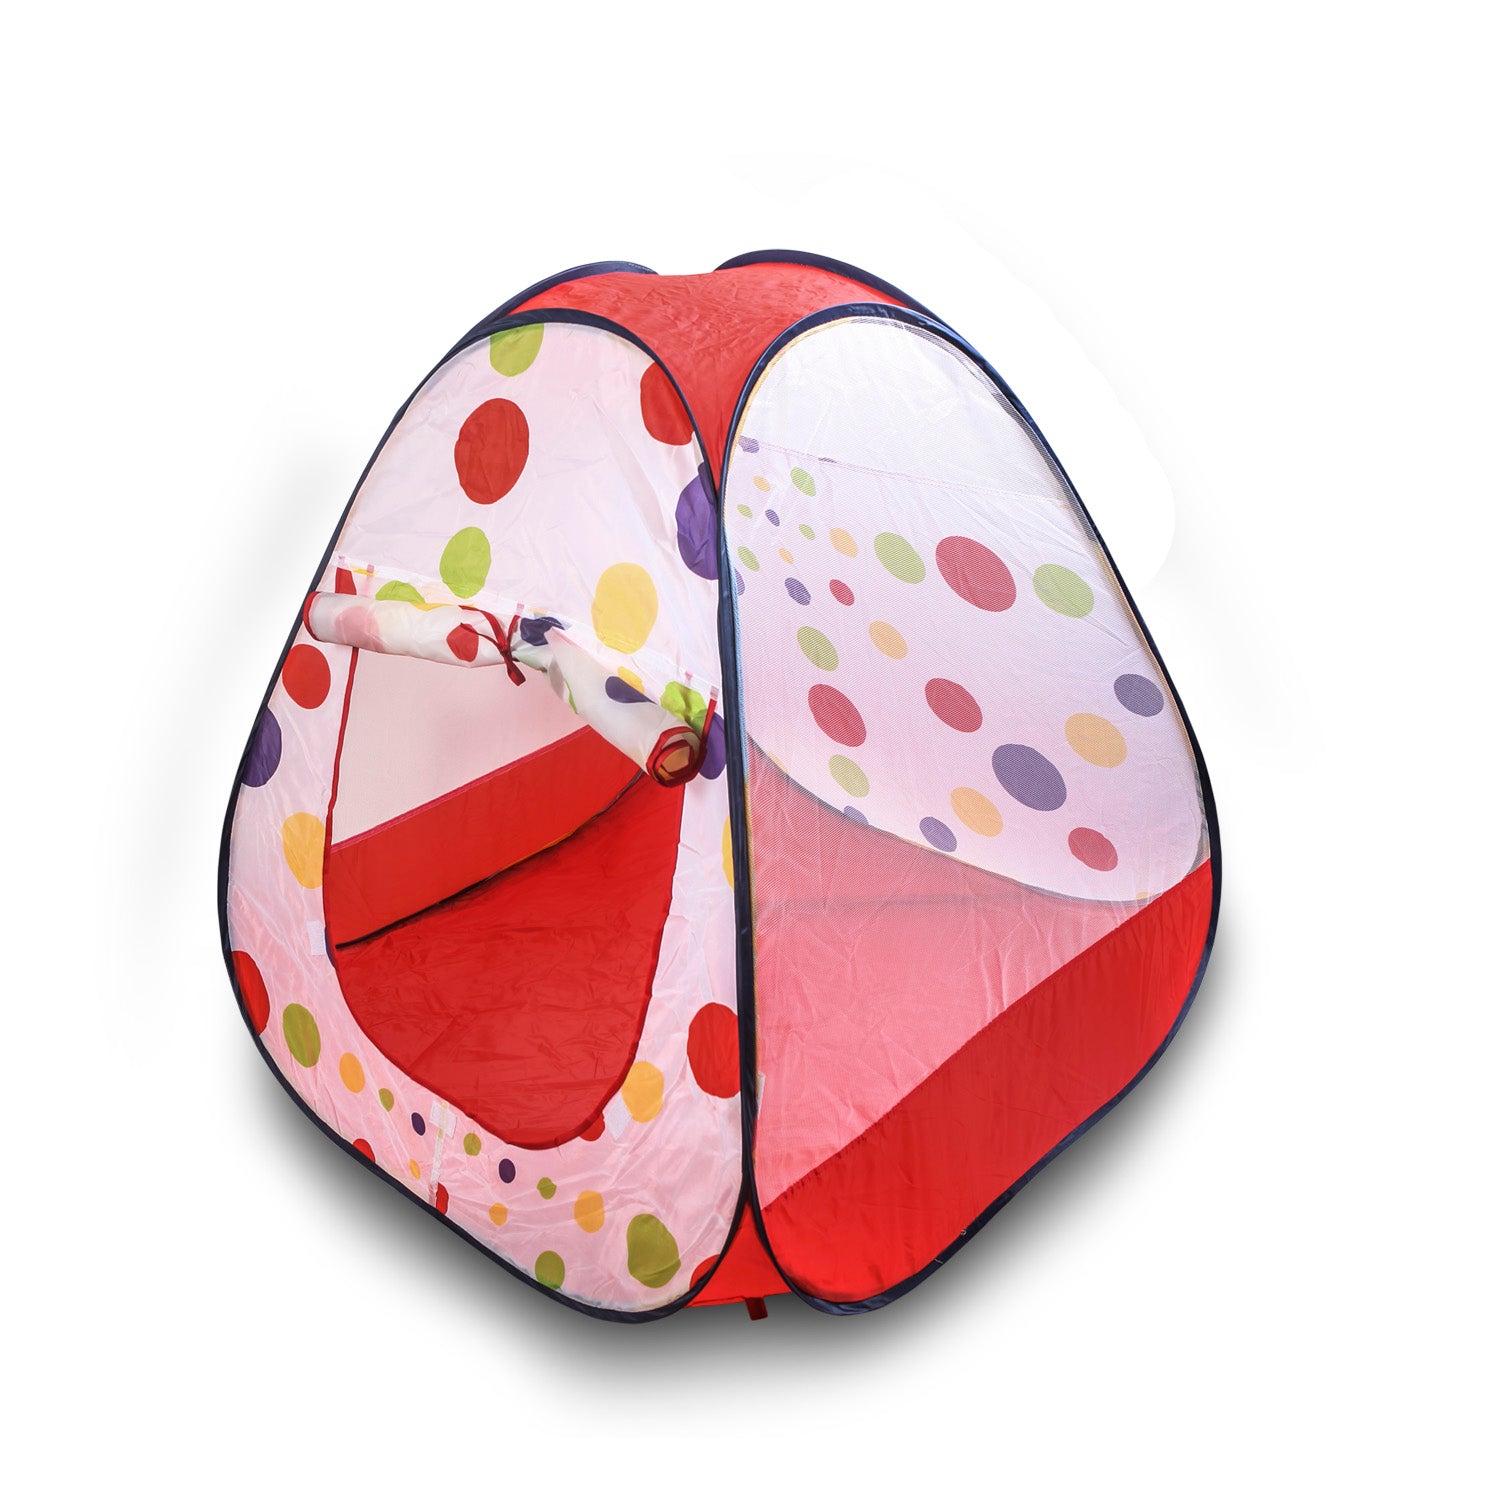 Playtime Foldable Ball Pit Tent Polka Dotted - Red